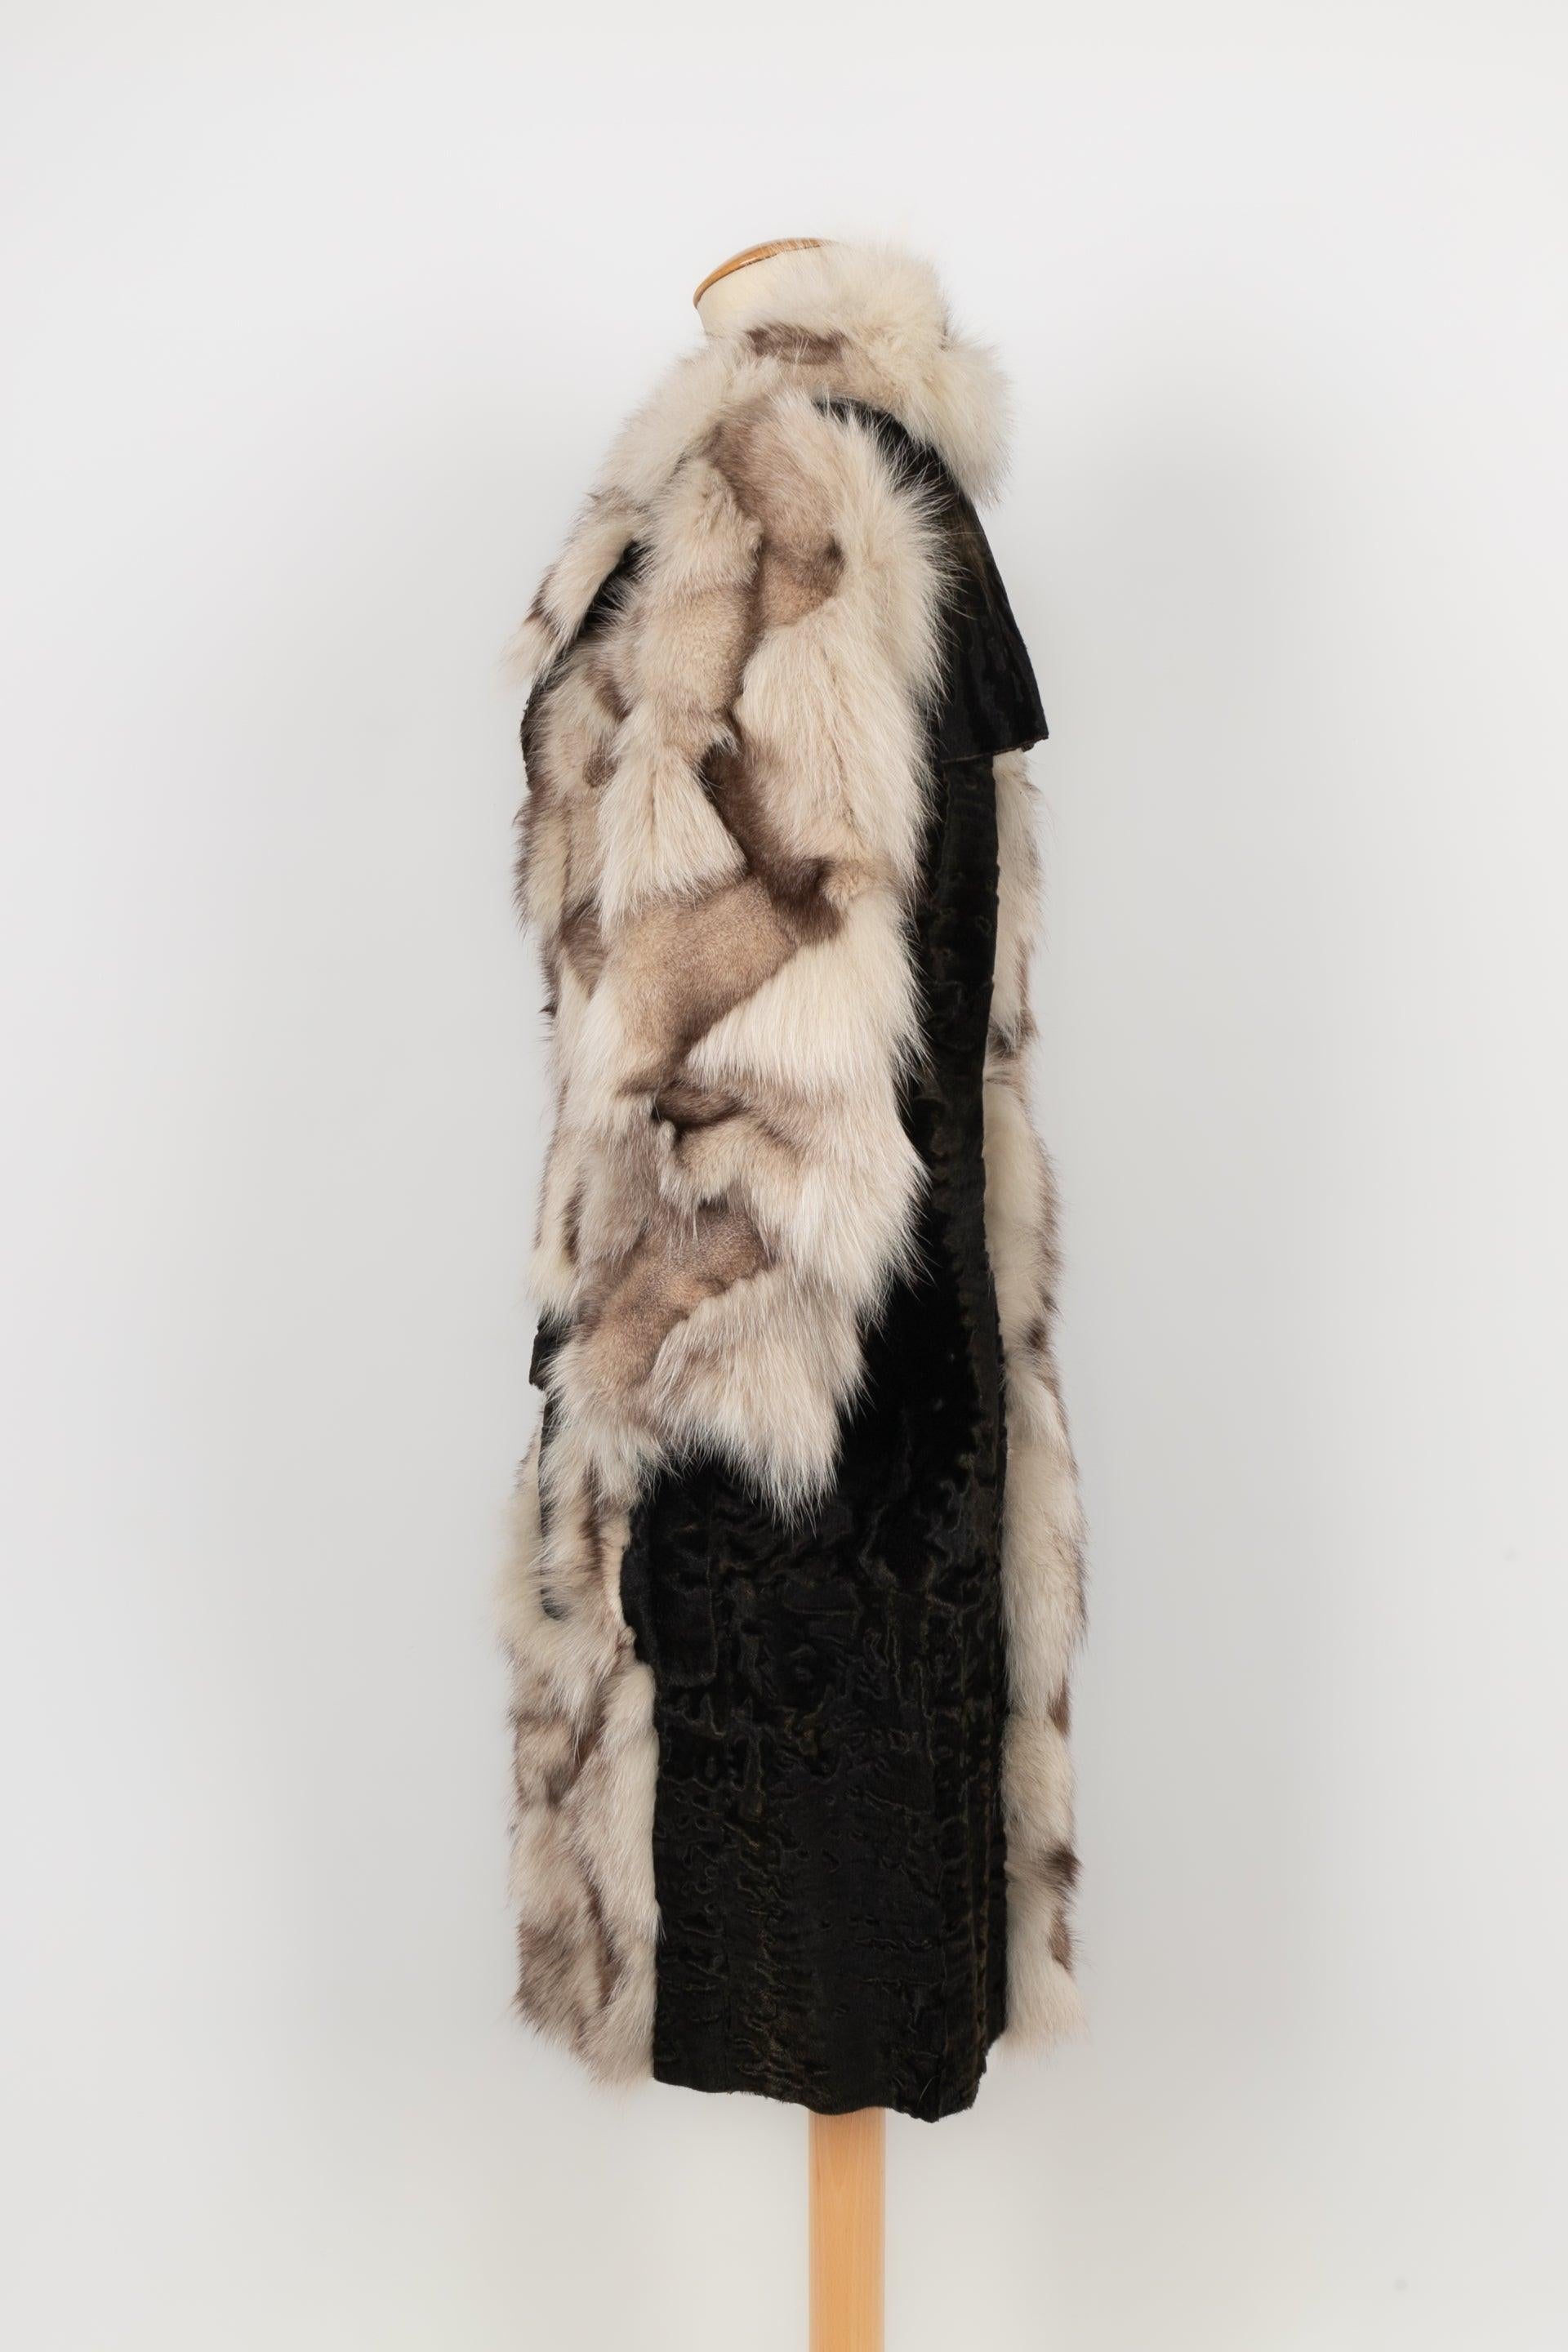 Dior - (Made in Italy) Astrakhan and fox patchwork fur coat. Indicated size 40FR. Fall-Winter 2006 Ready-to-Wear Collection.

Additional information:
Condition: Very good condition
Dimensions: Shoulder width: 40 cm
Chest: 48 cm
Sleeve length: 50